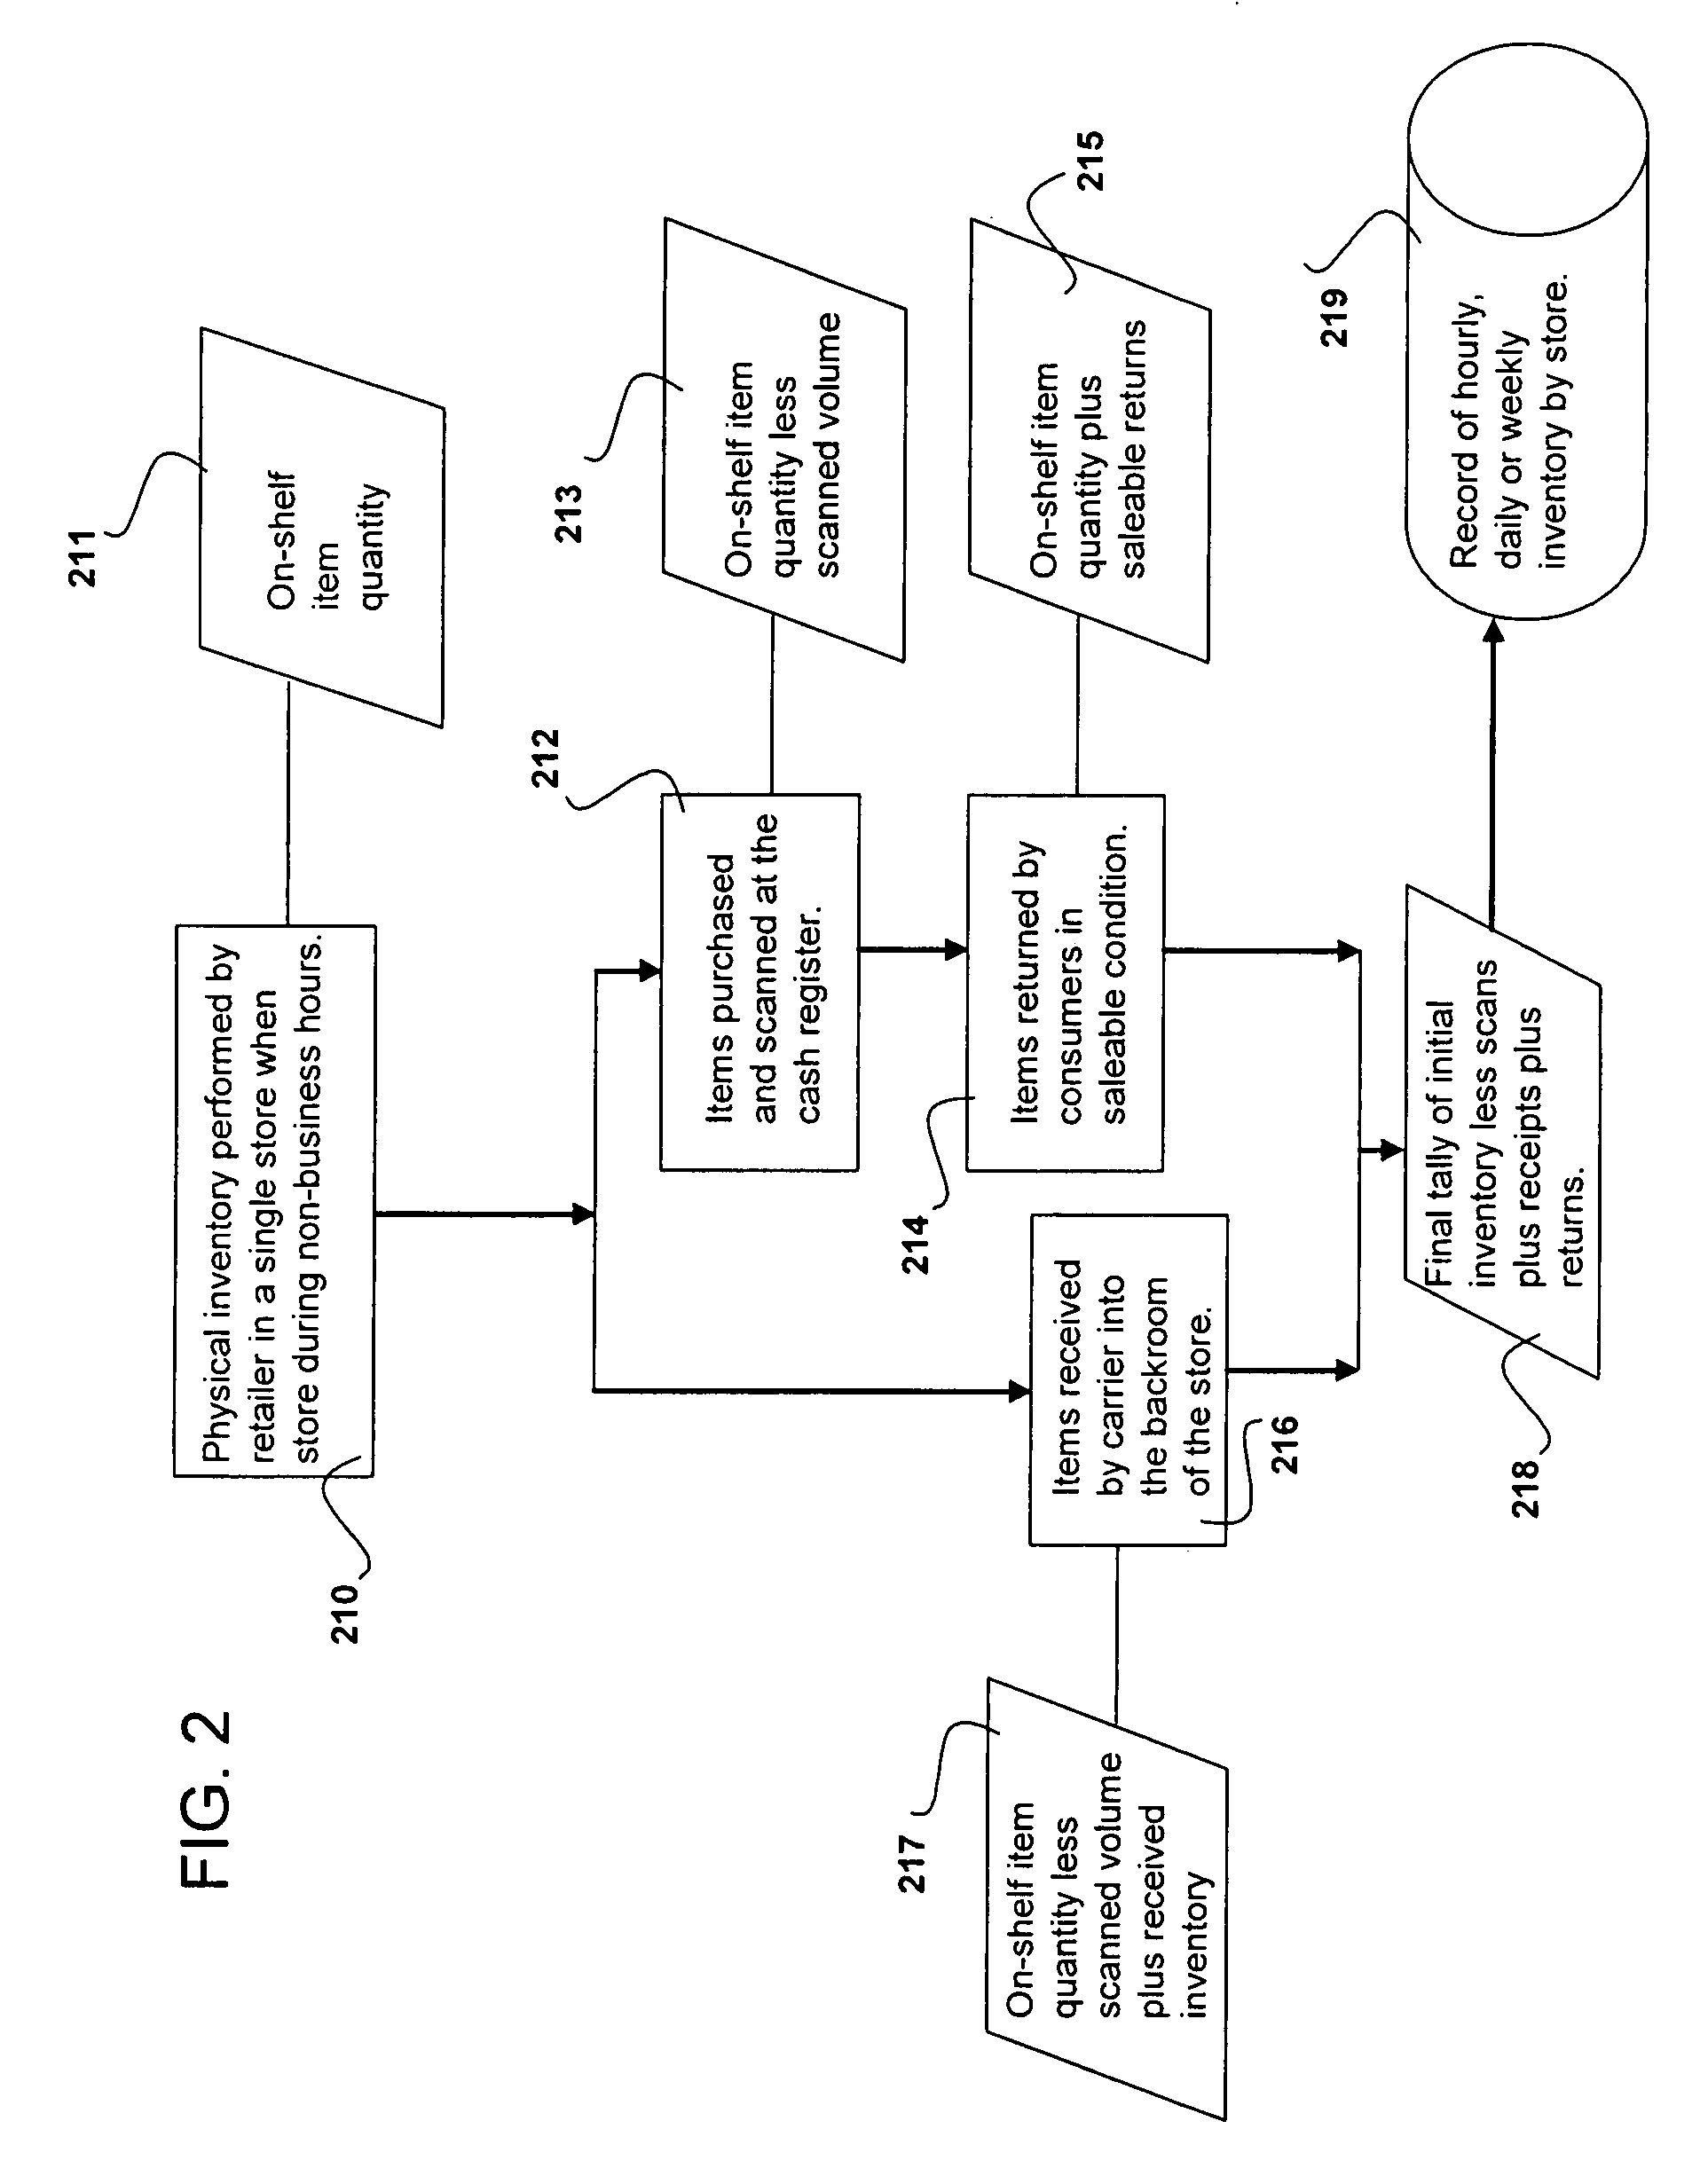 System and method for identifying implicit events in a supply chain